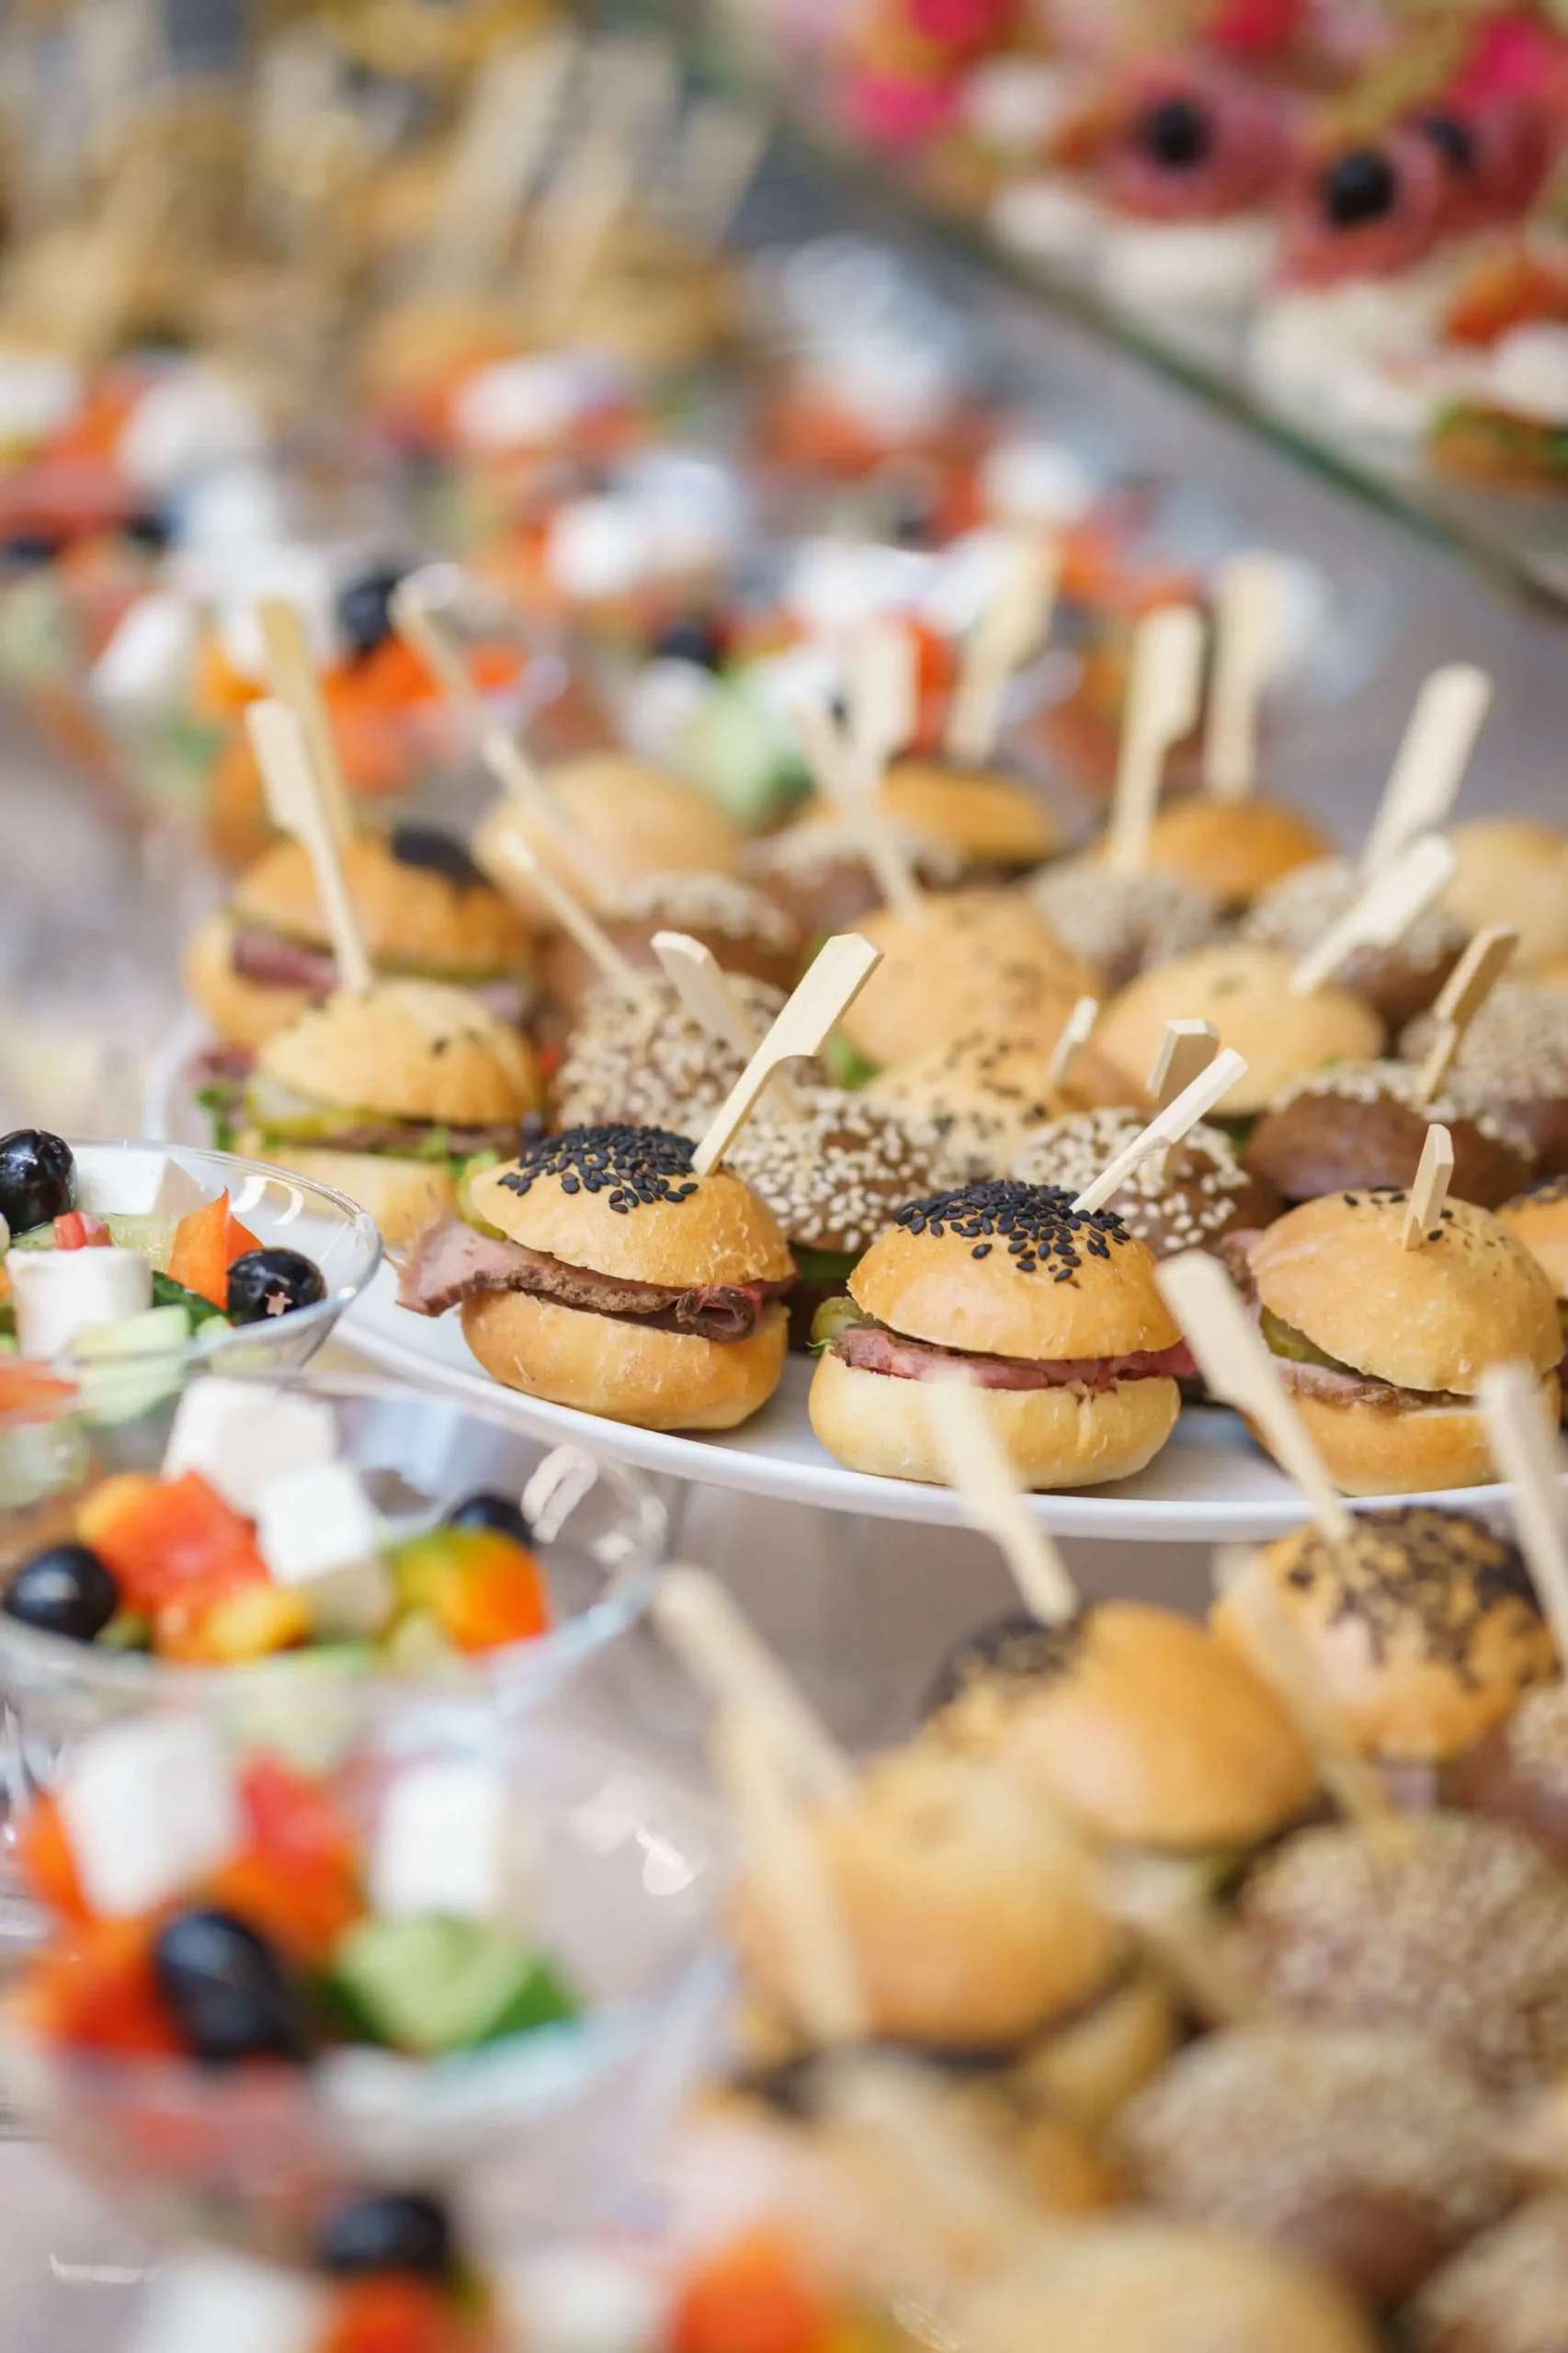 Corporate Staff Catering Services